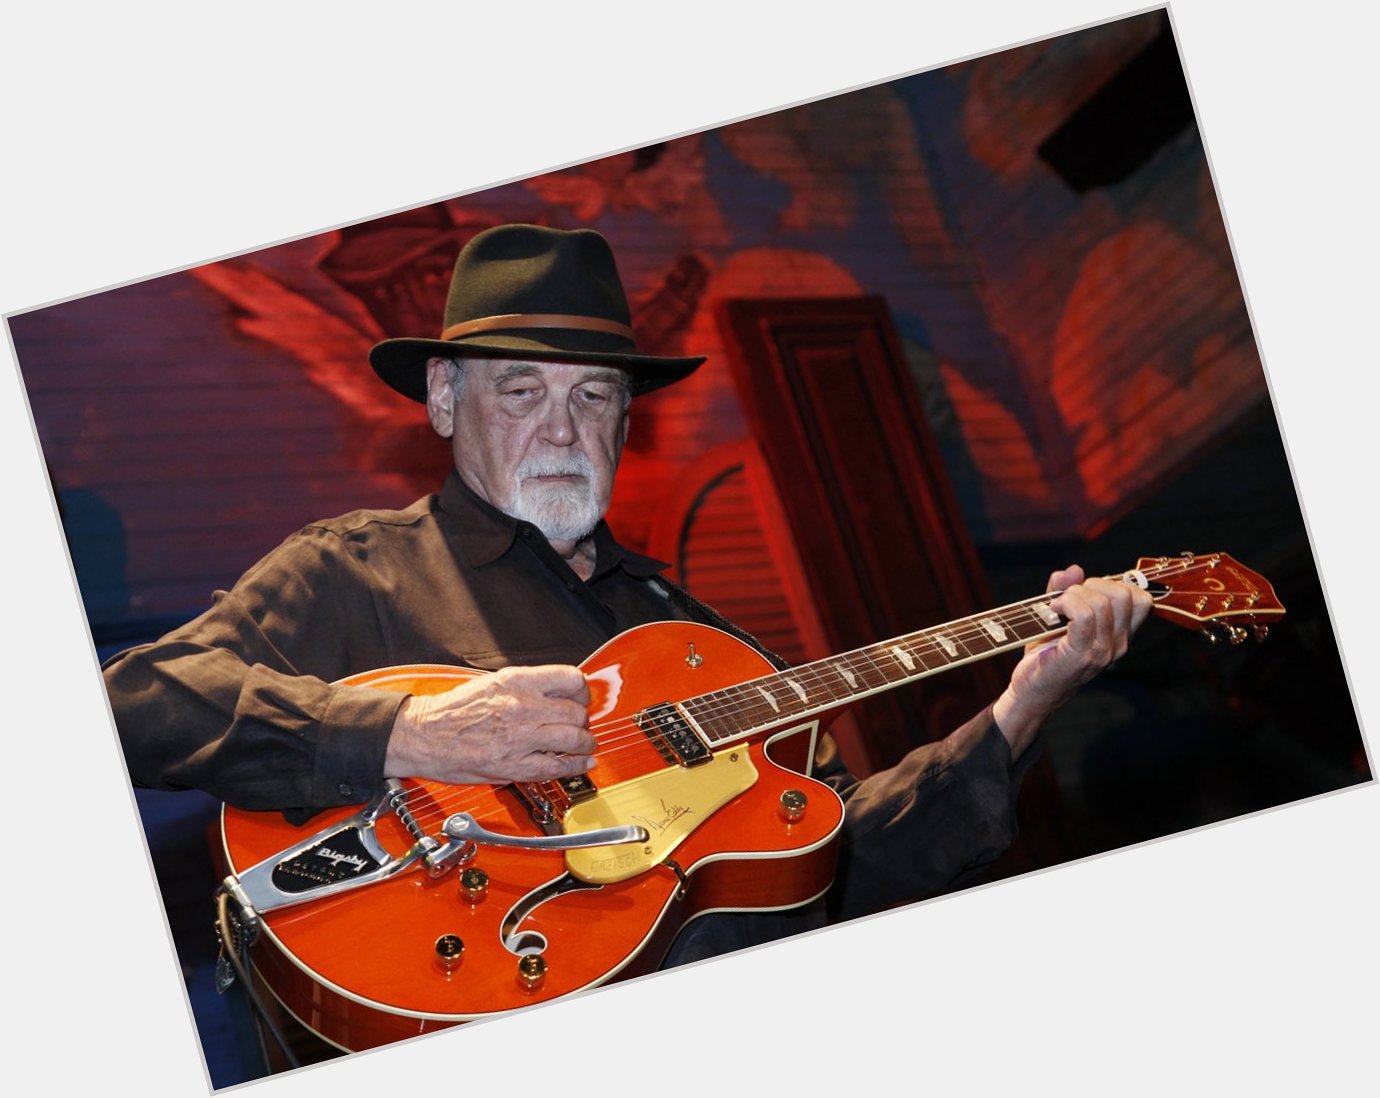 Please join me here at in wishing the one and only Duane Eddy a very Happy 83rd Birthday today  